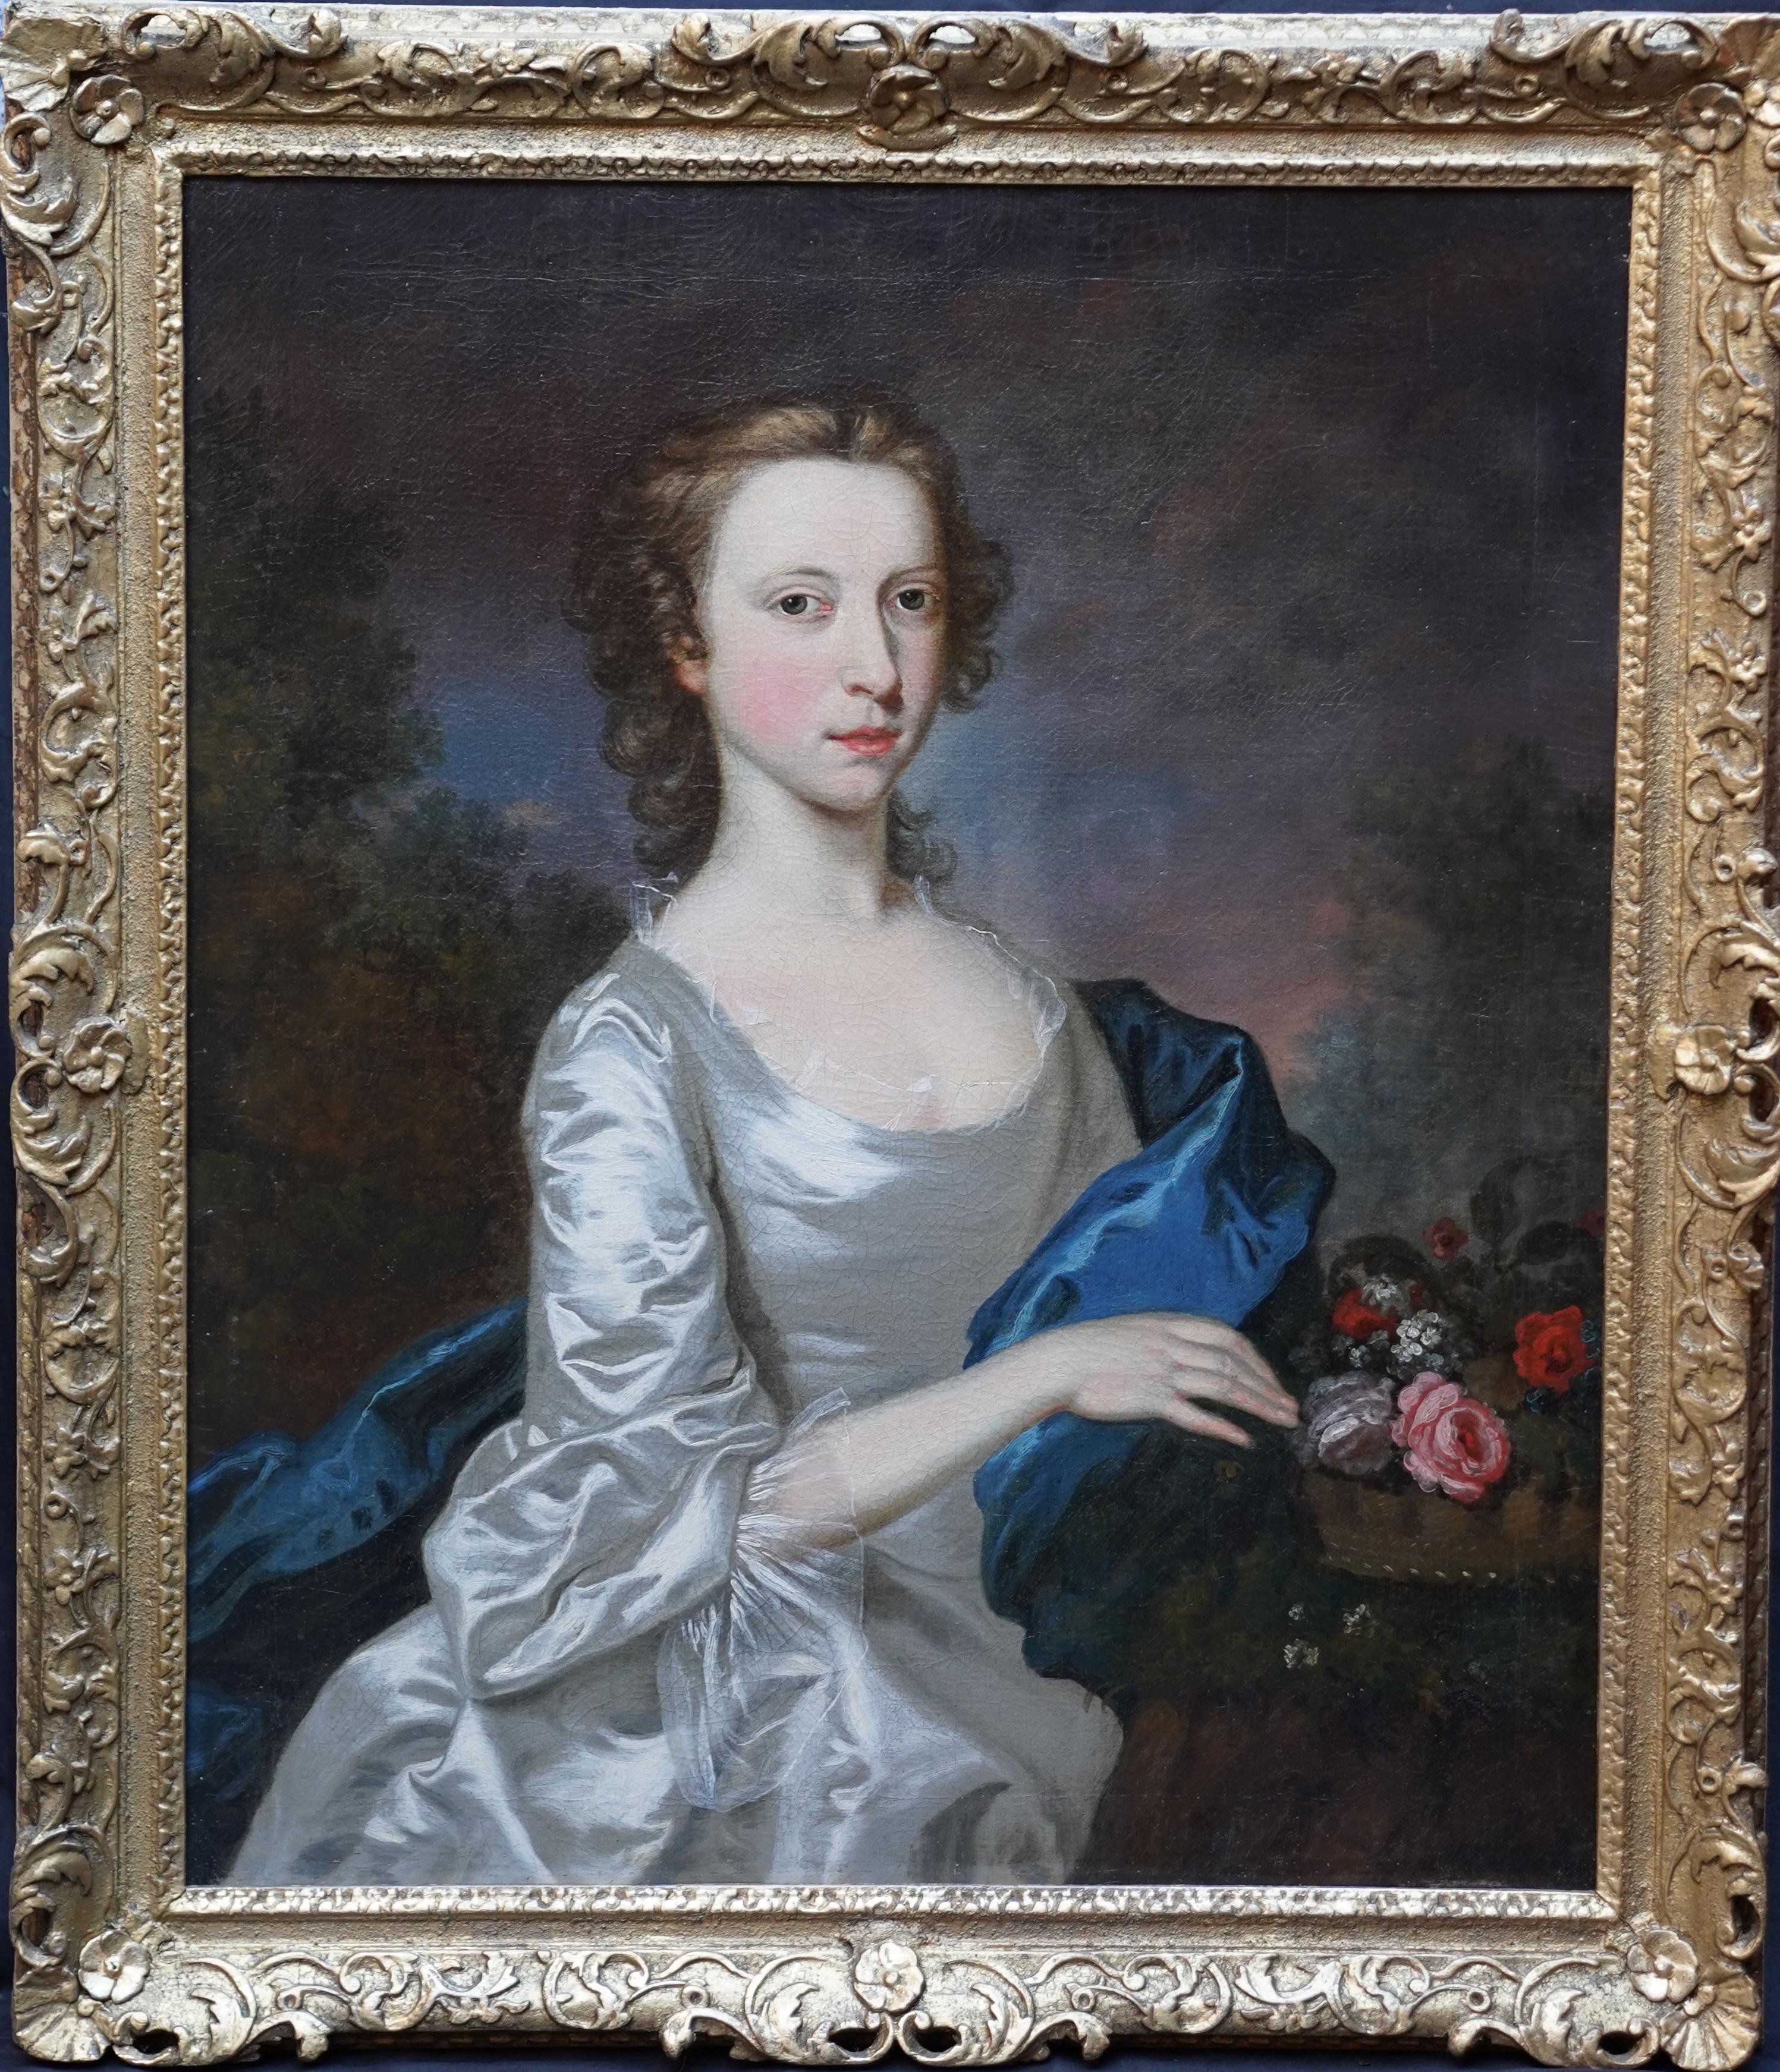 This superb Scottish 18th century Old Master portrait oil painting is attributed to noted Scottish portrait painter Allan Ramsey. Painted circa 1780 it is a three quarter length portrait of a young woman in a landscape with flowers in a basket. She